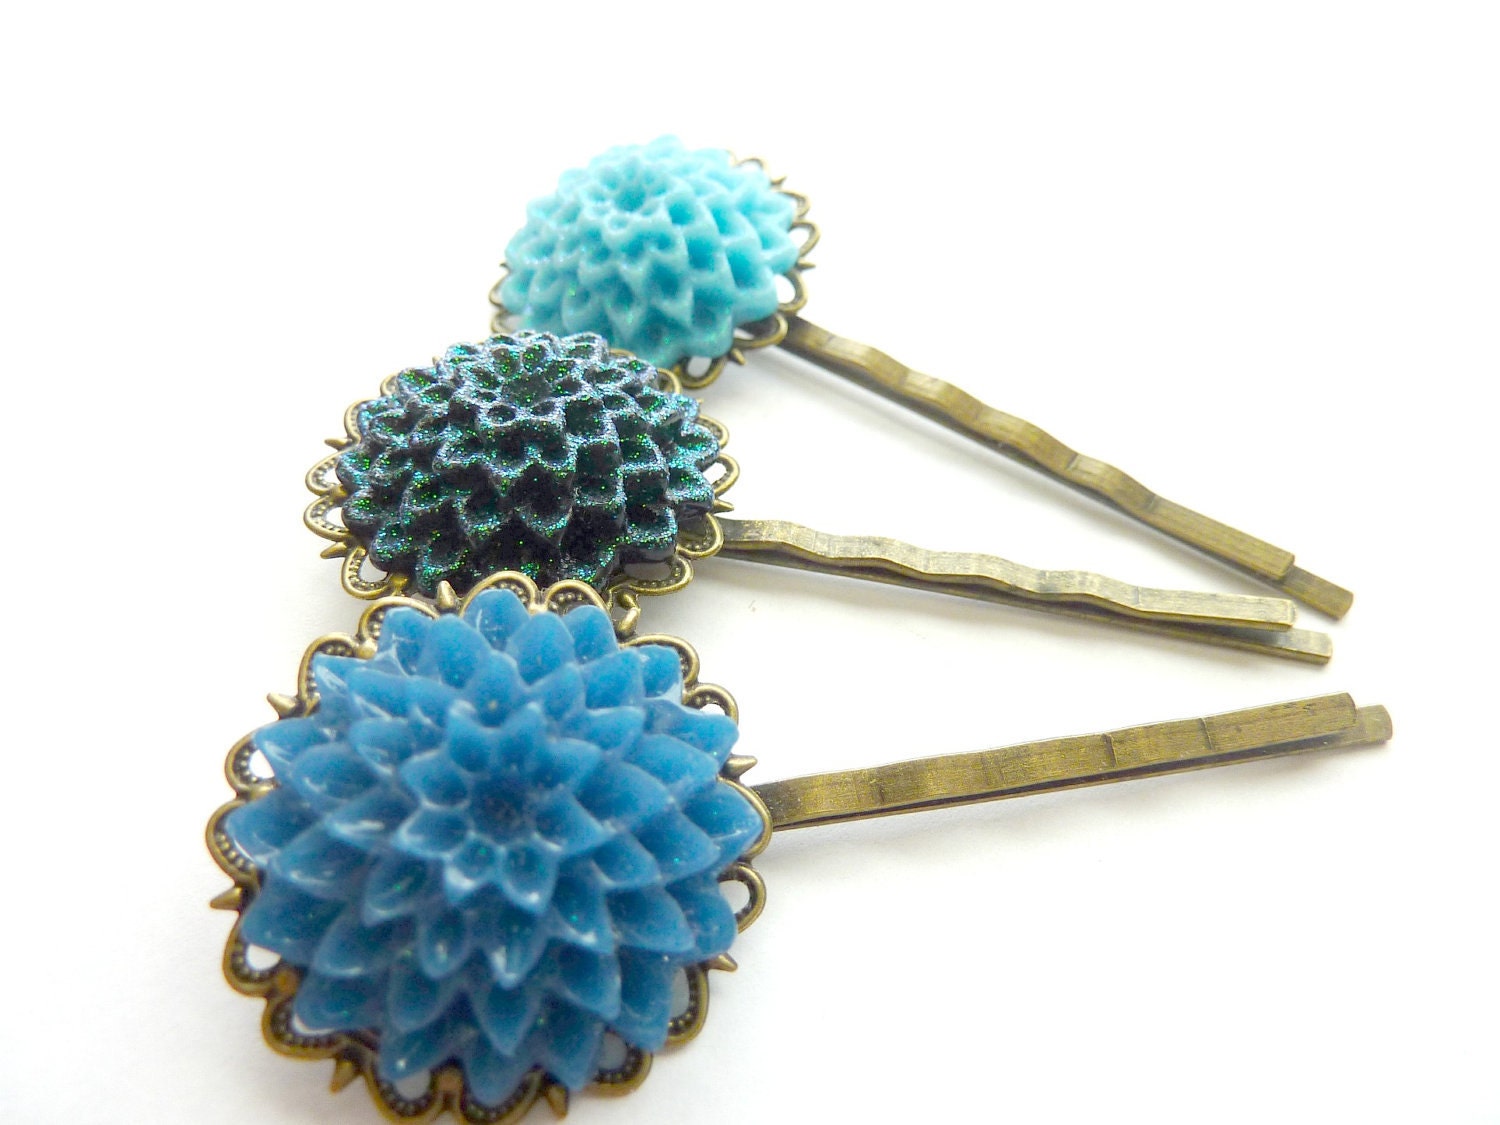 Vintage bobby hair pins iridescent deep green blue, teal and turquoise blue chrysanthemums flowers on antique filigree